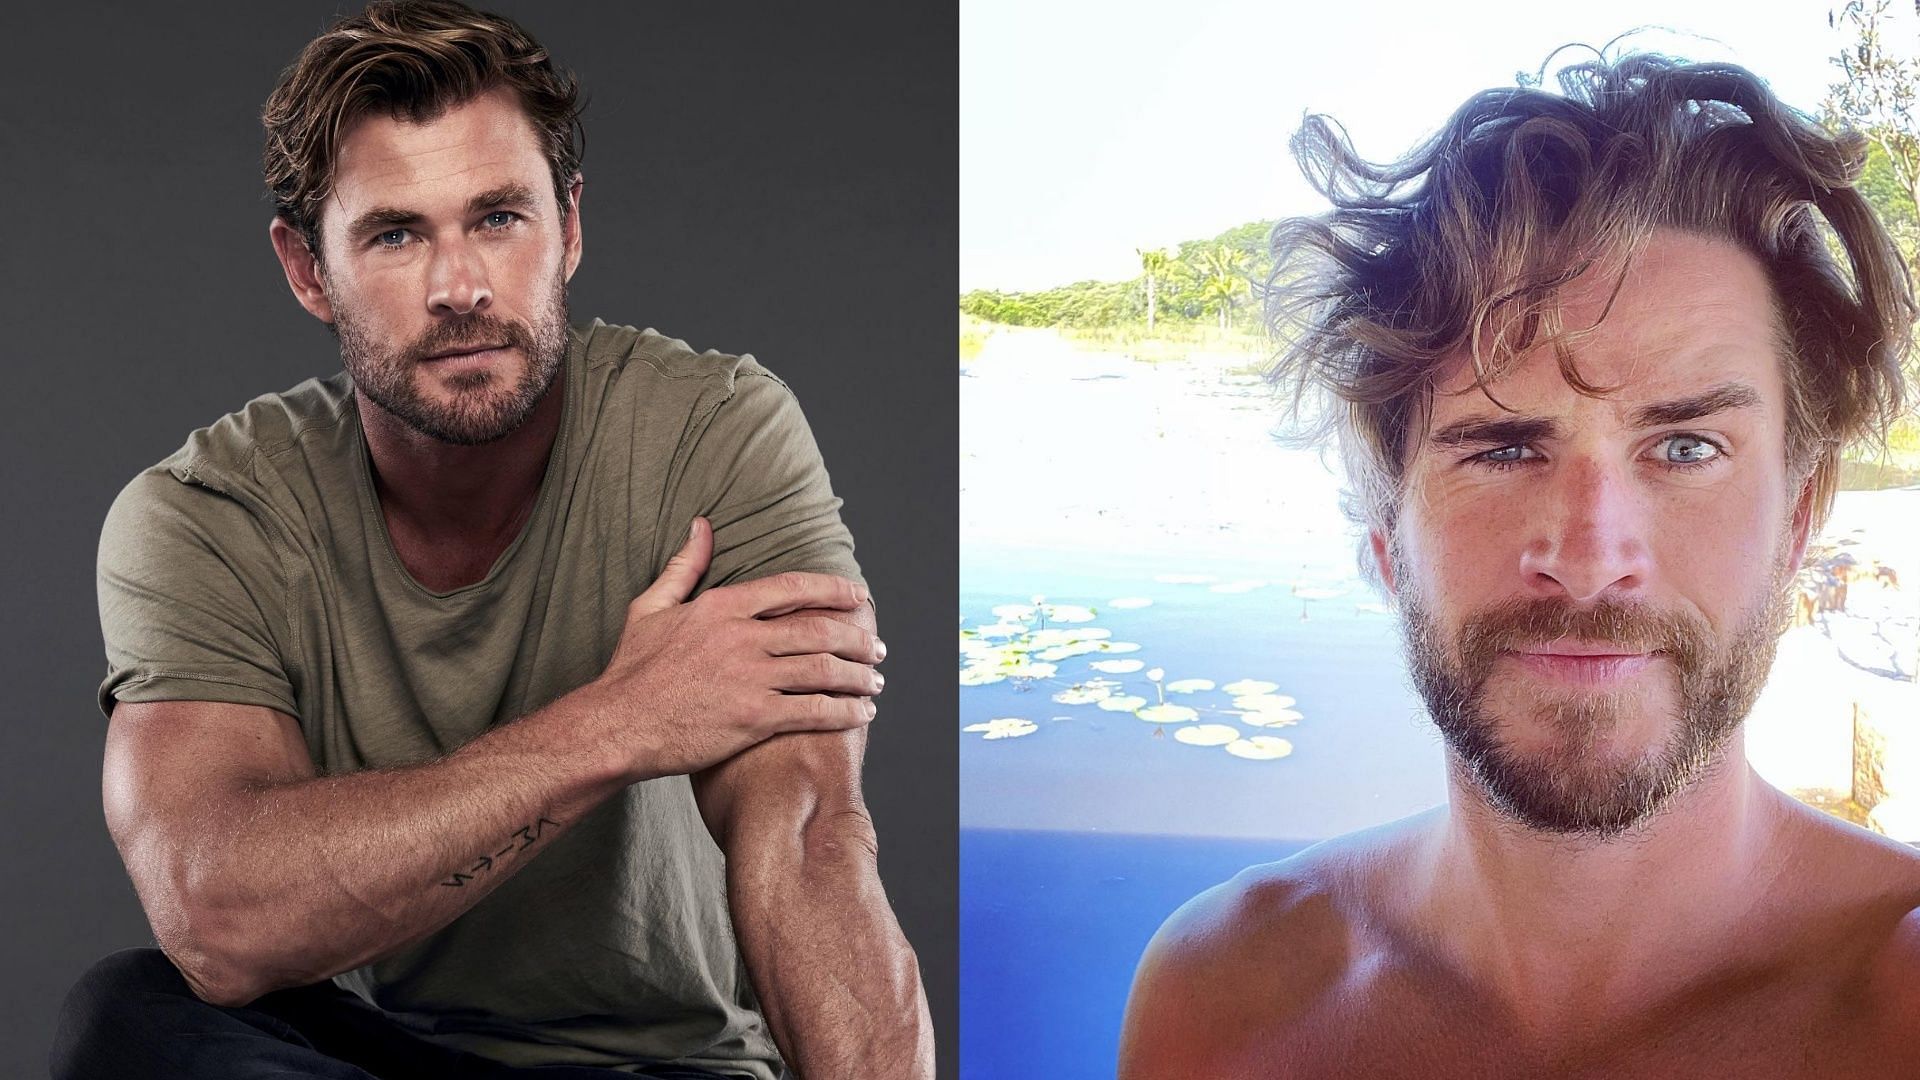 Chris Hemsworth revealed that his brother Liam Hemsworth had also auditioned for 